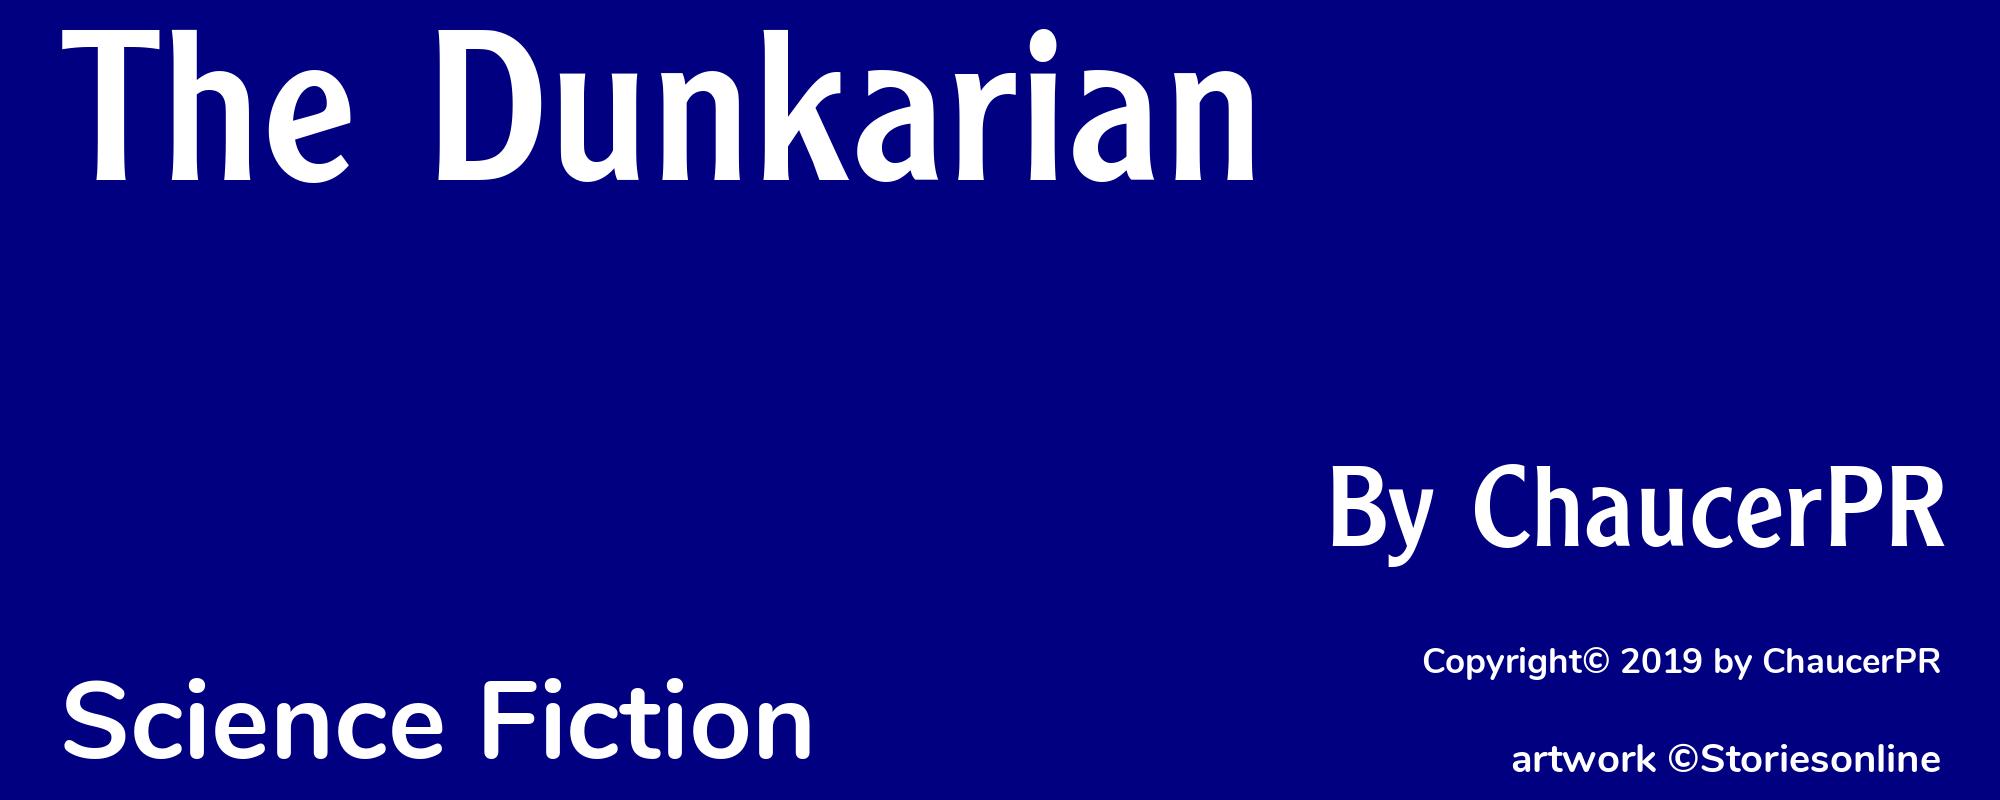 The Dunkarian - Cover